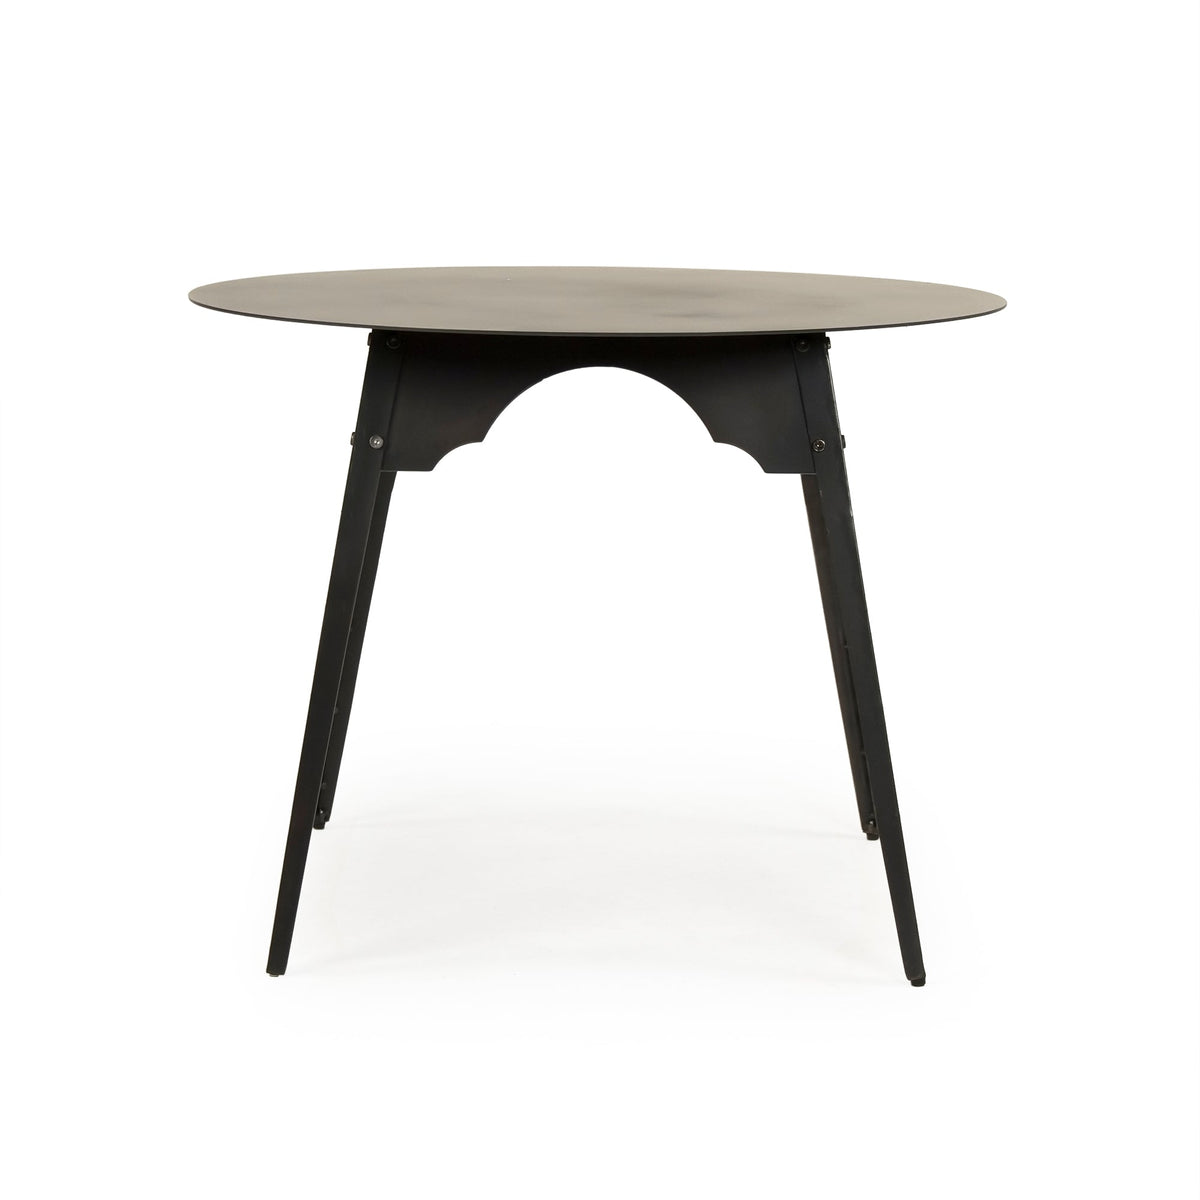 Sheril Metal Table by Zentique